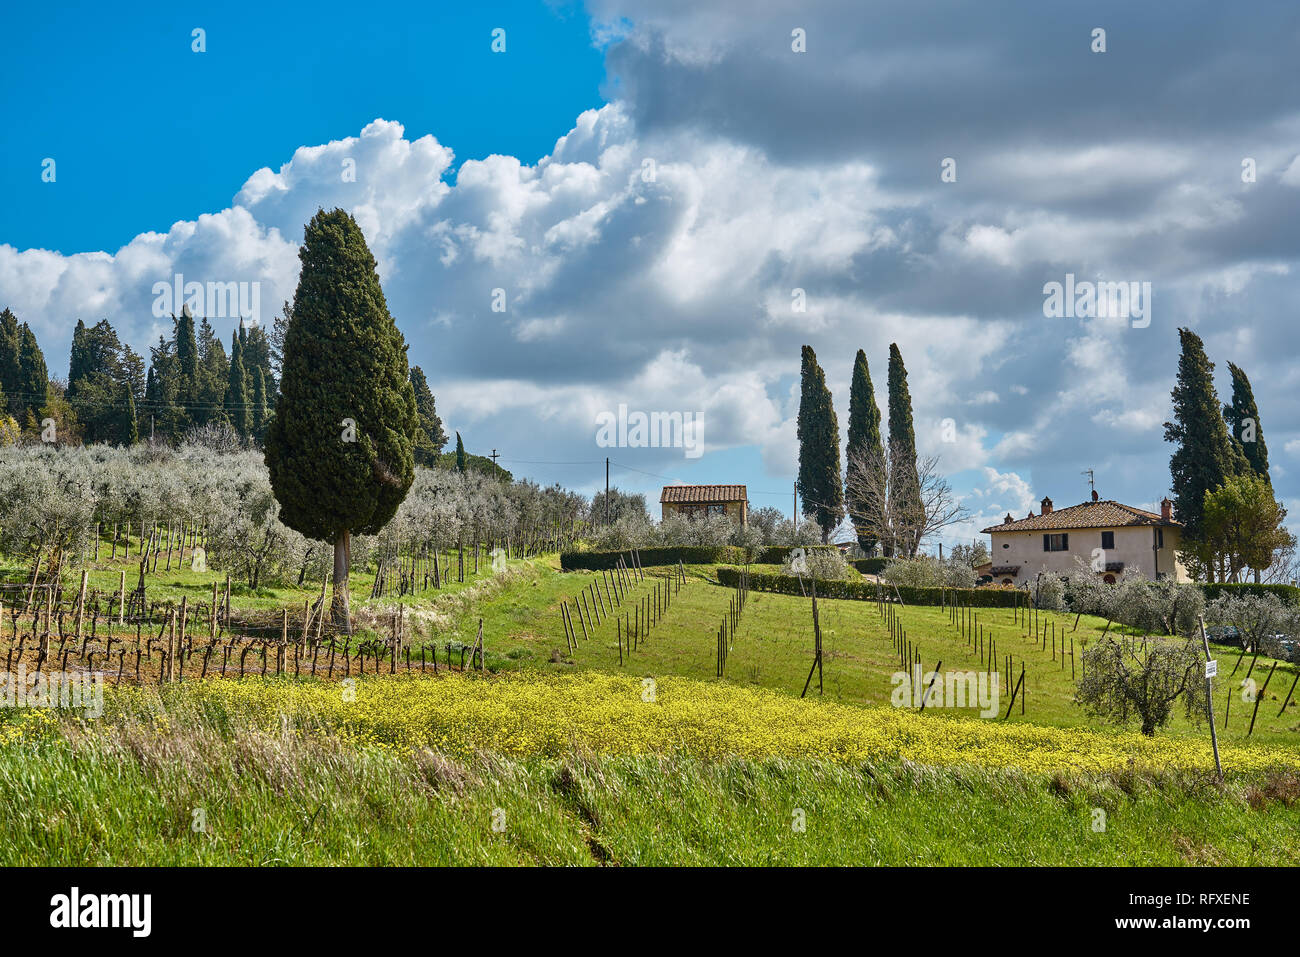 Vineyards outside of San Gimignano city center in spring time, Italy Stock Photo